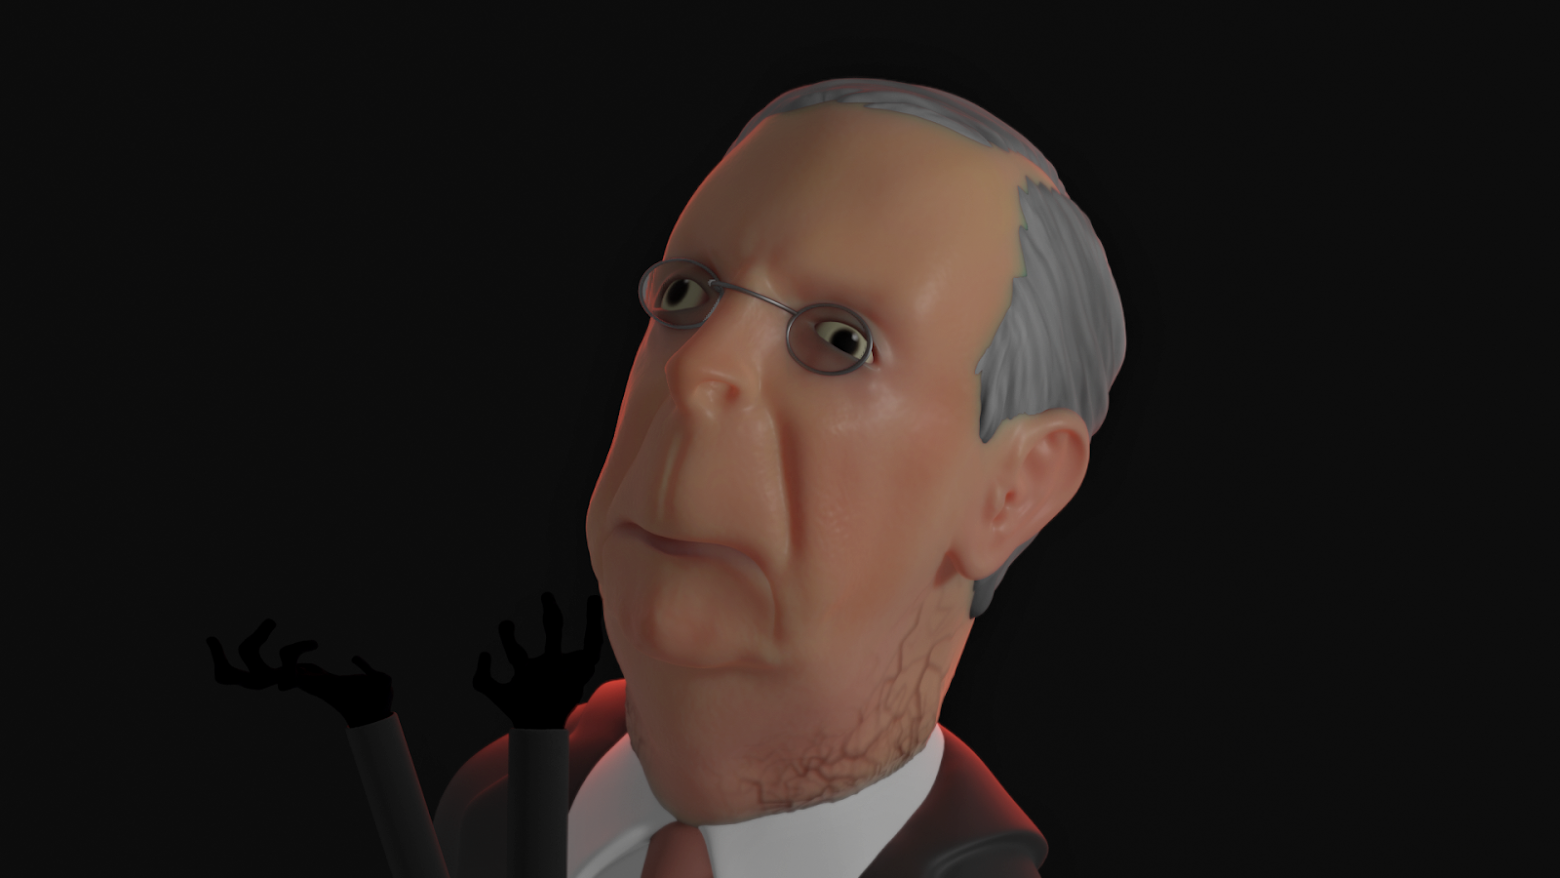 An animated character wearing a suit.